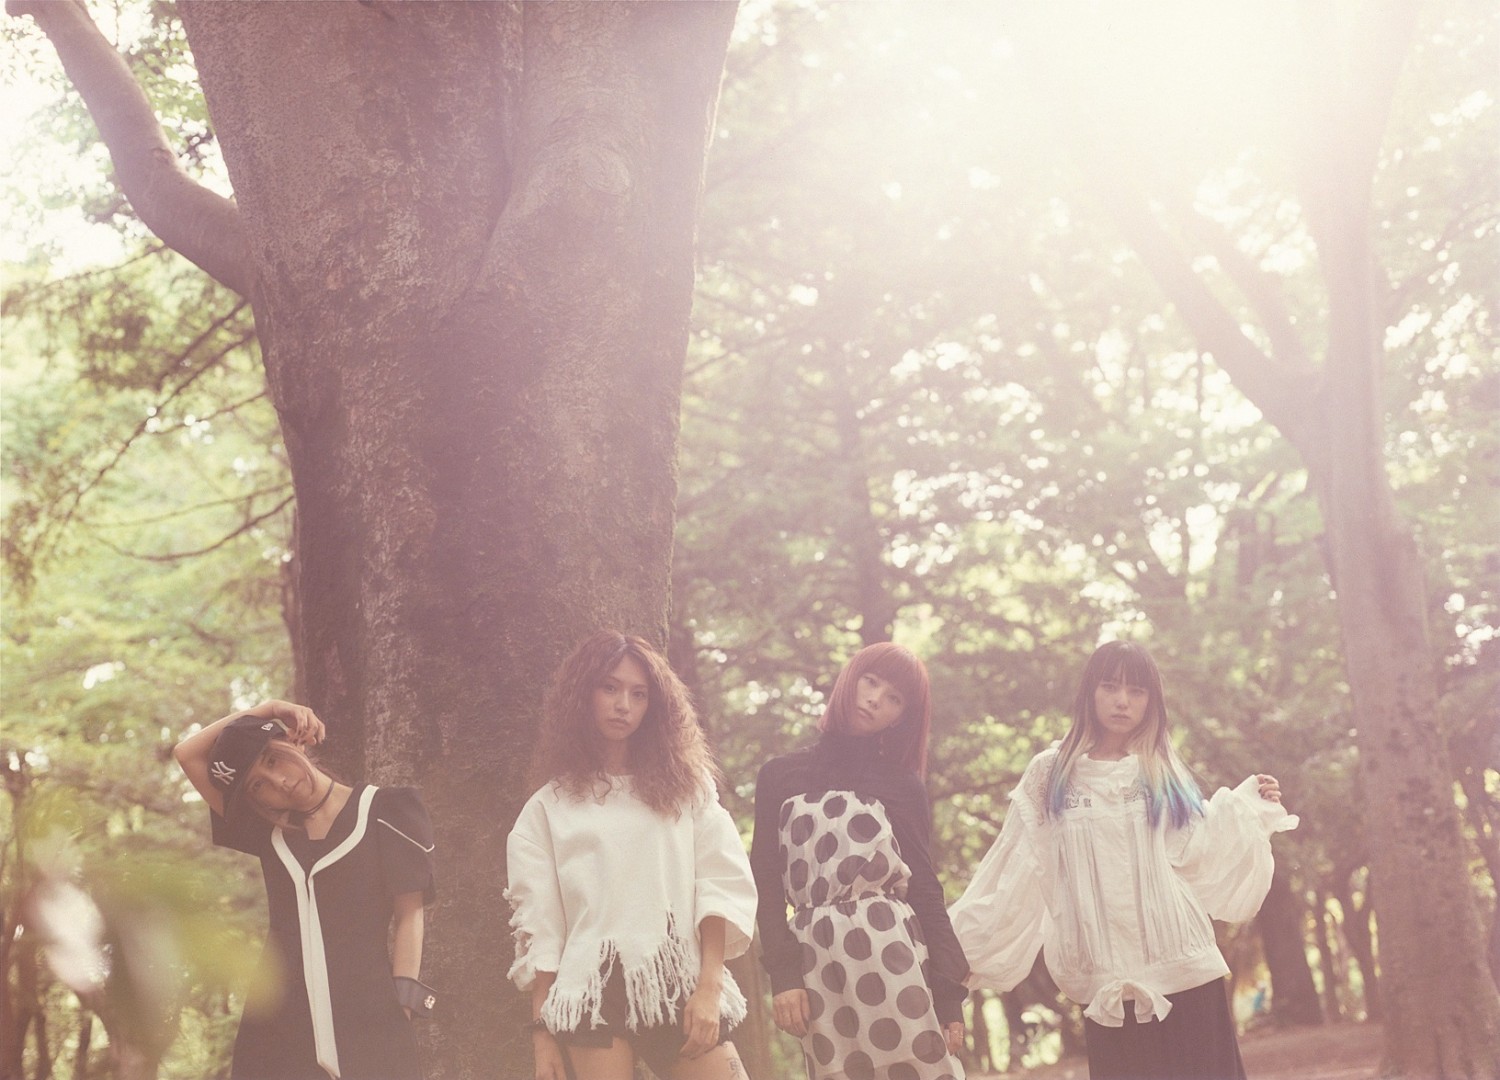 Check the Details of SCANDAL’s New Single “Take Me Out” & Save the Date for Their Europe Tour!